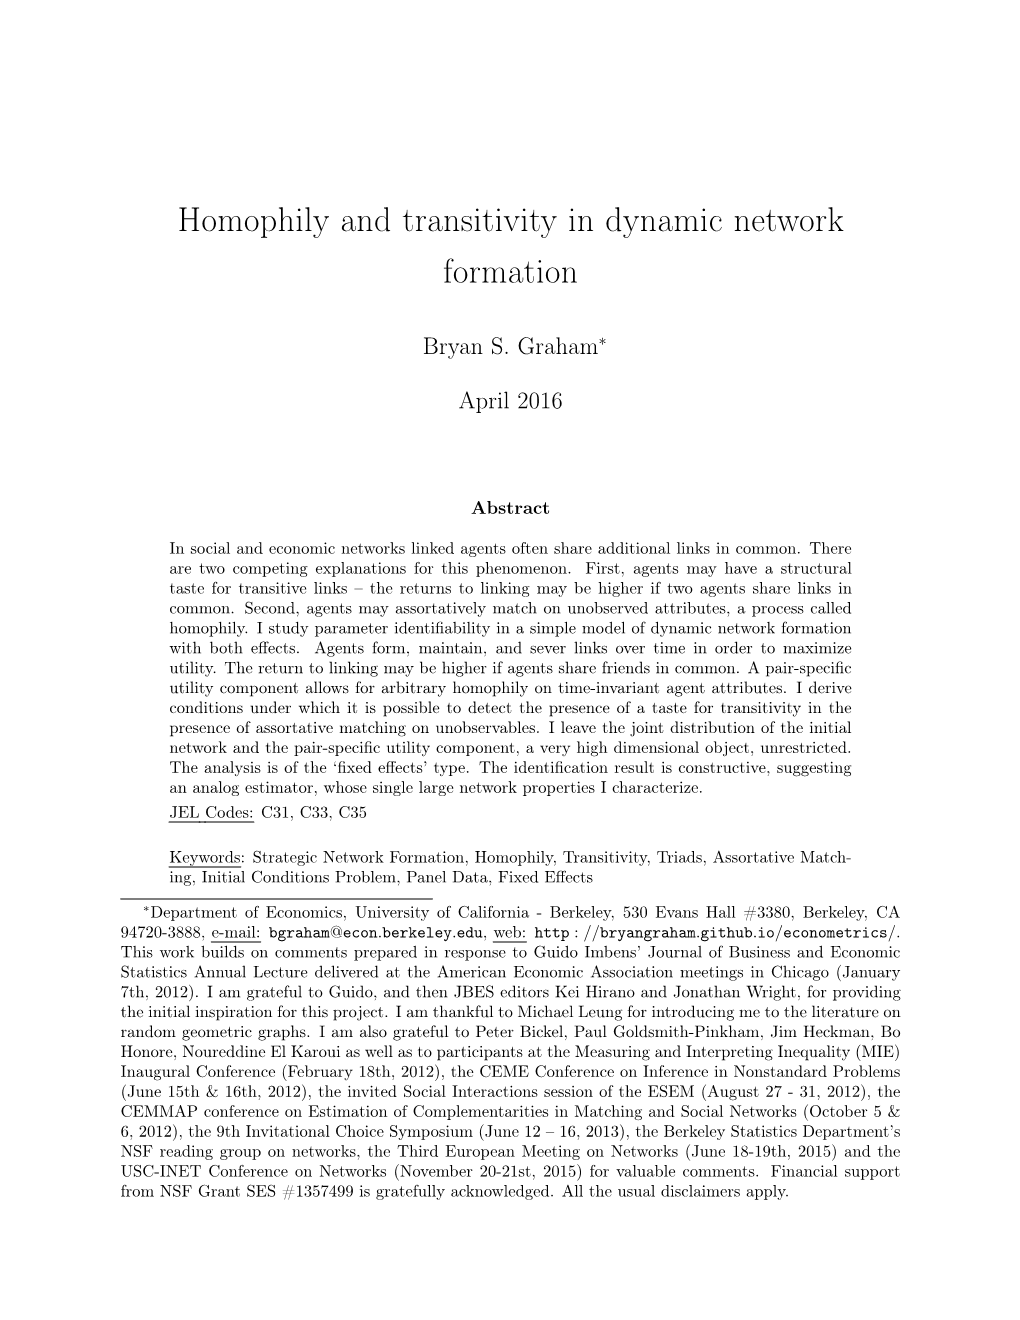 Homophily and Transitivity in Dynamic Network Formation